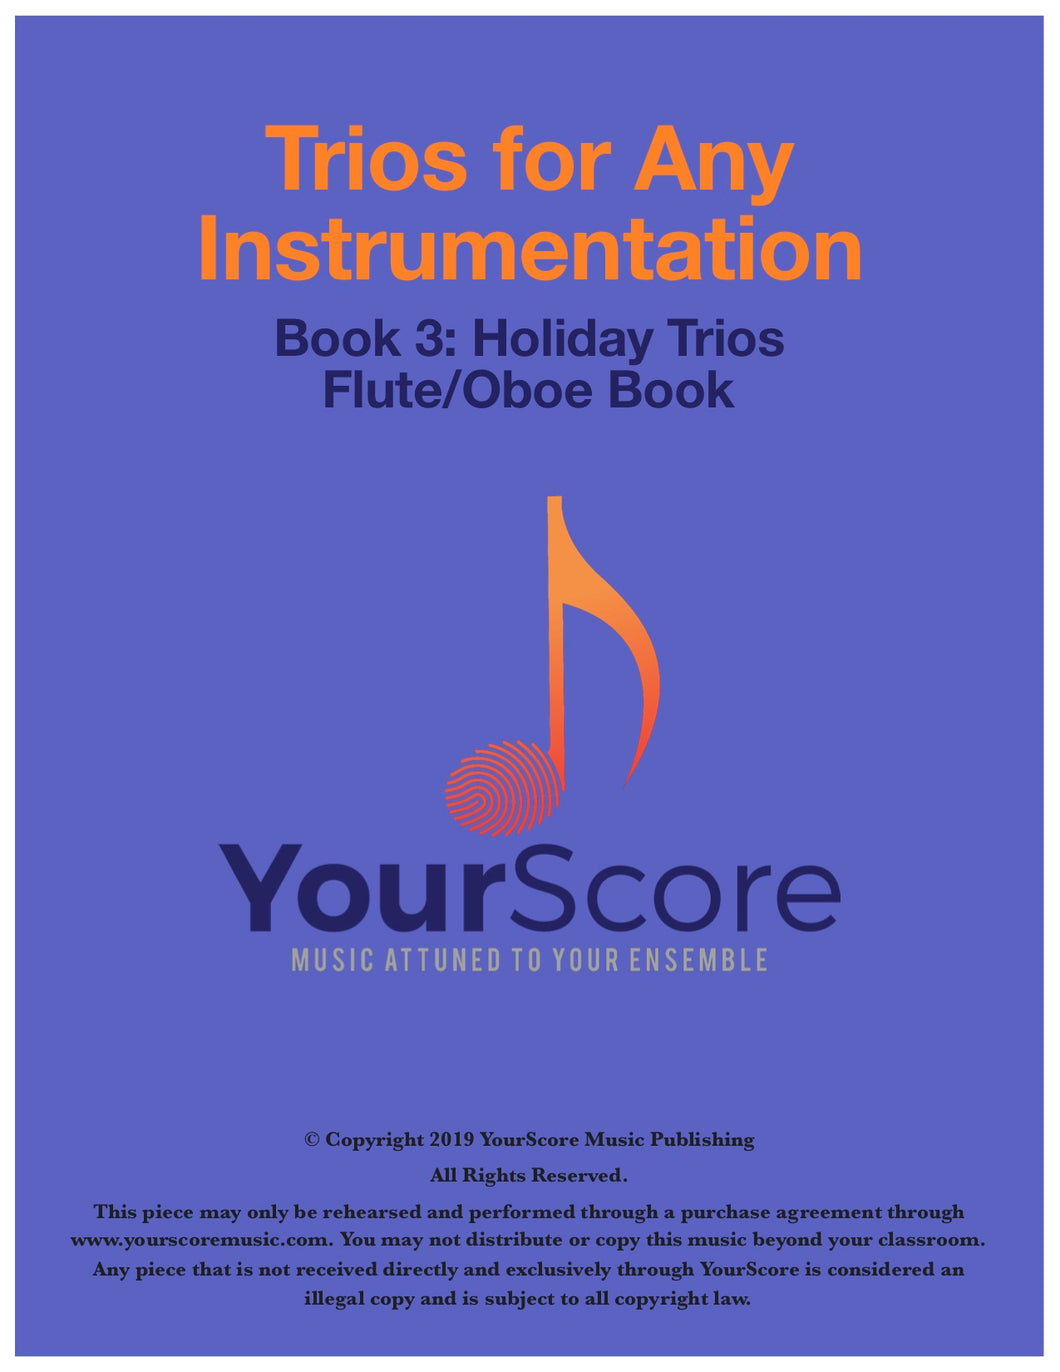 Trios for Any Instrumentation Book 3: Holiday Survival Kit